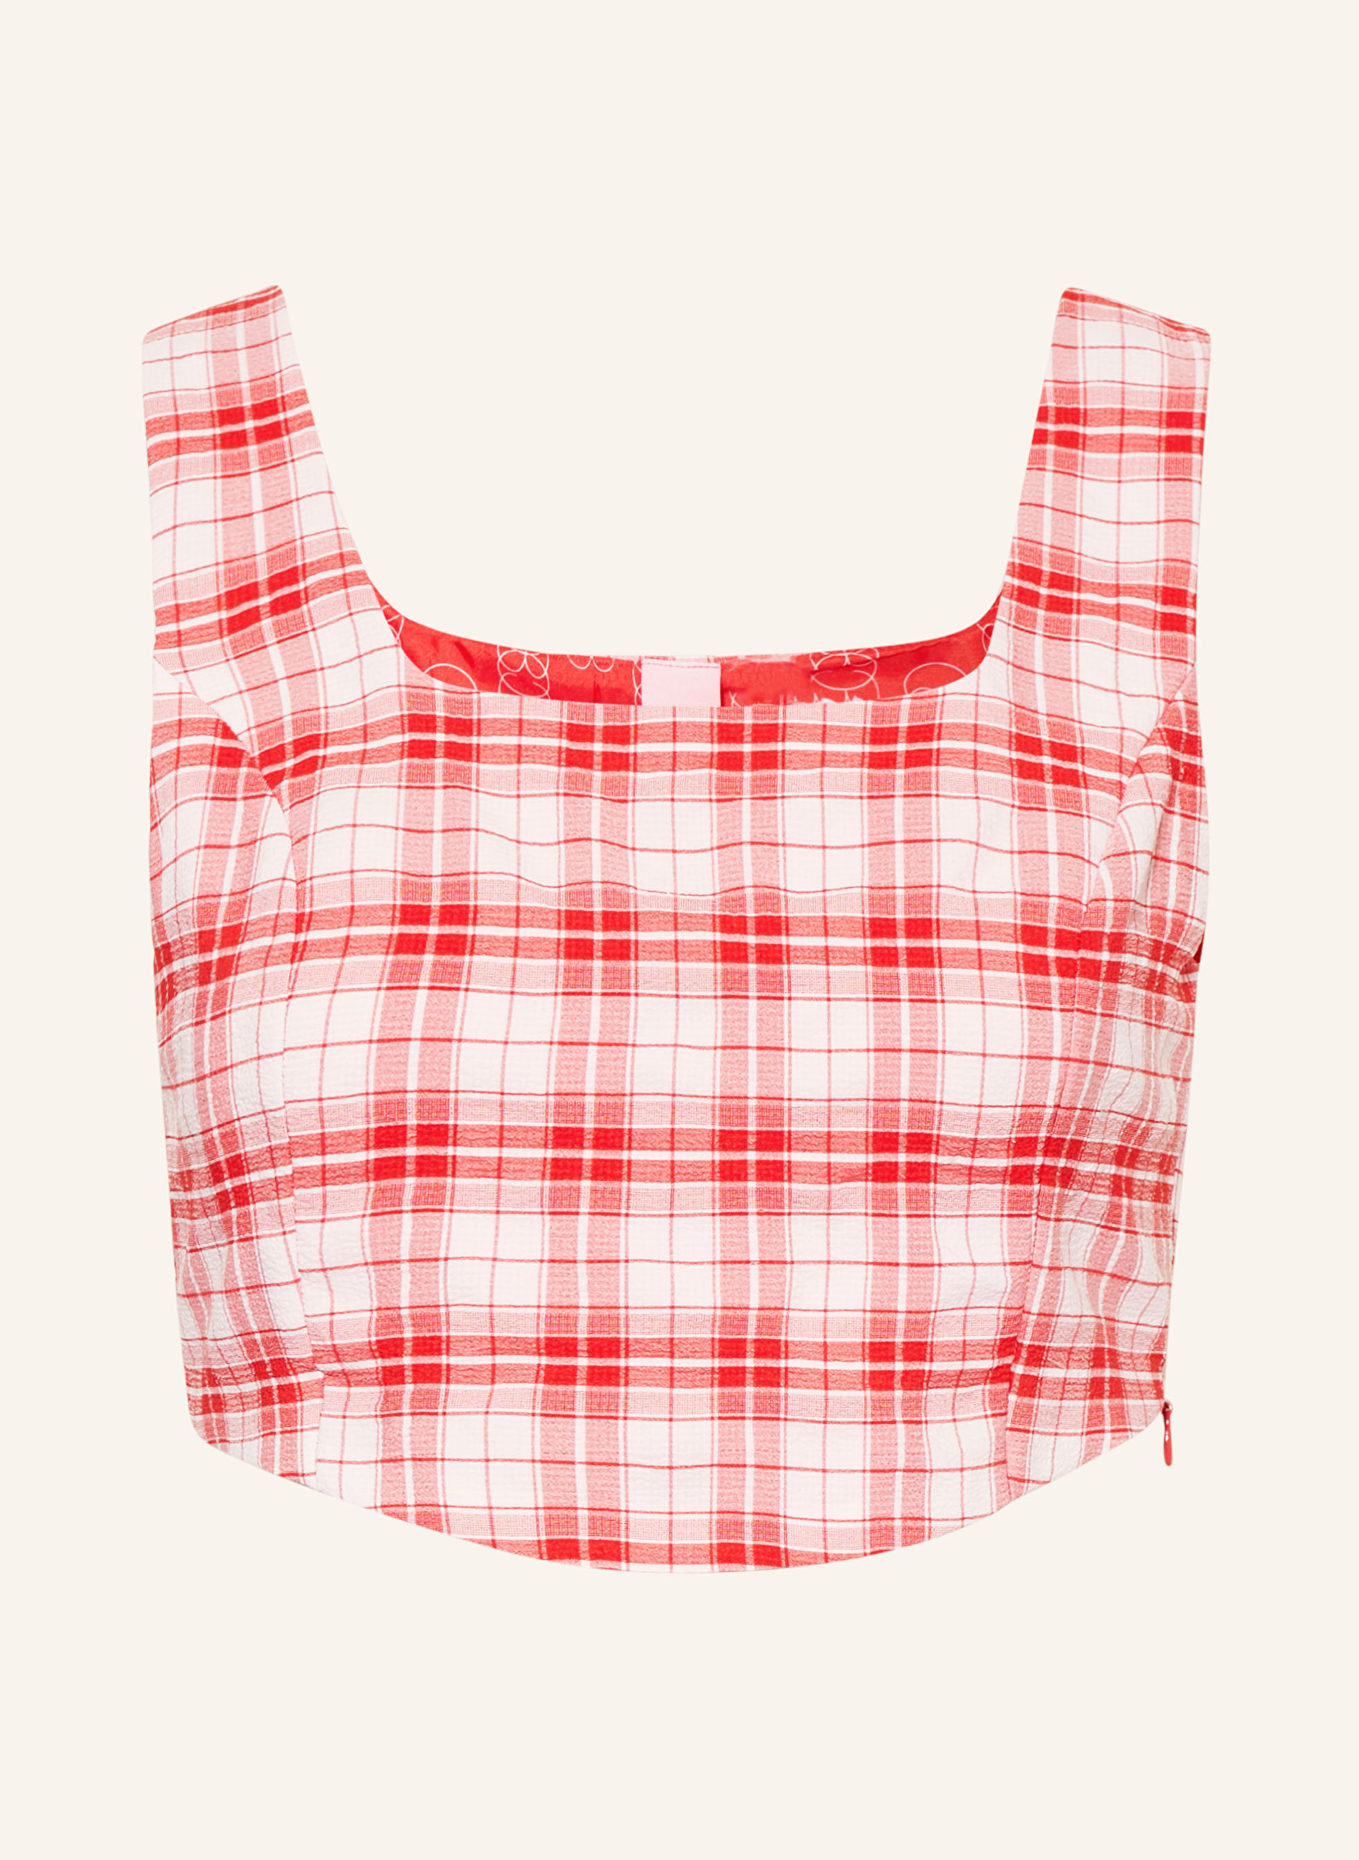 SOMETHINGNEW Cropped-Top SNCHLOE, Farbe: ROT/ WEISS (Bild 1)